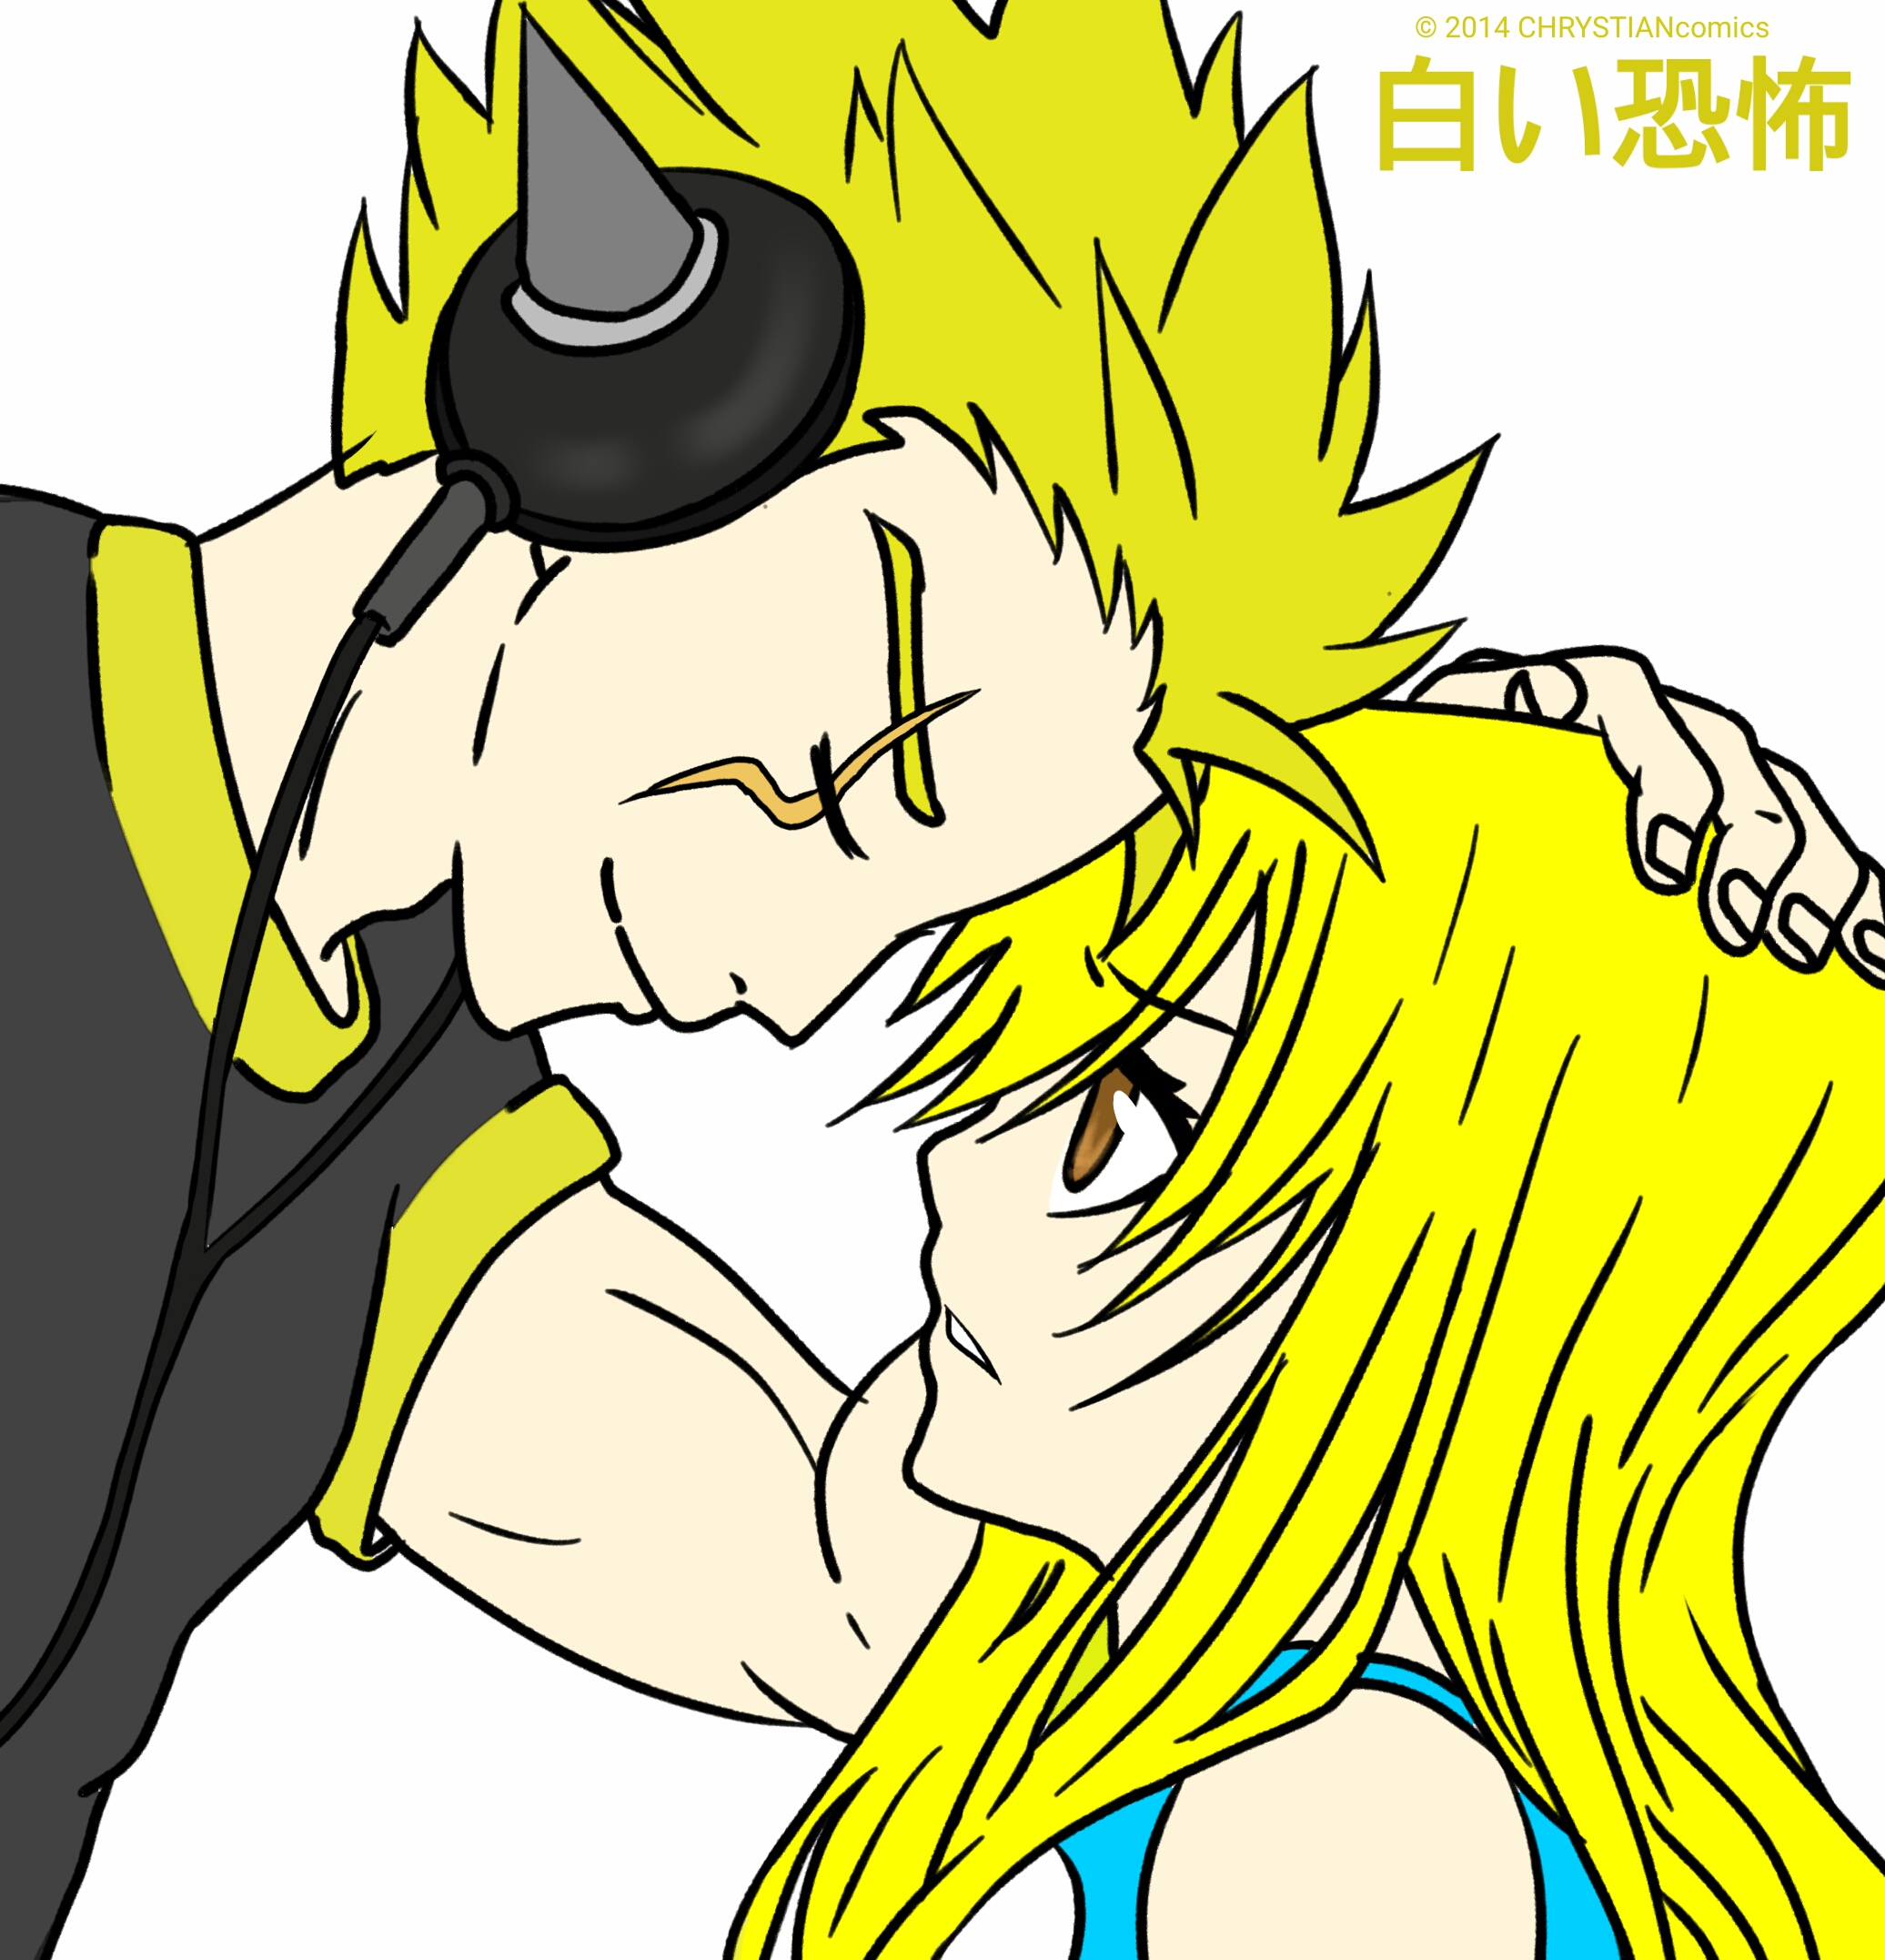 Laxus x Lucy request by CHRYSTIANcomics on DeviantArt